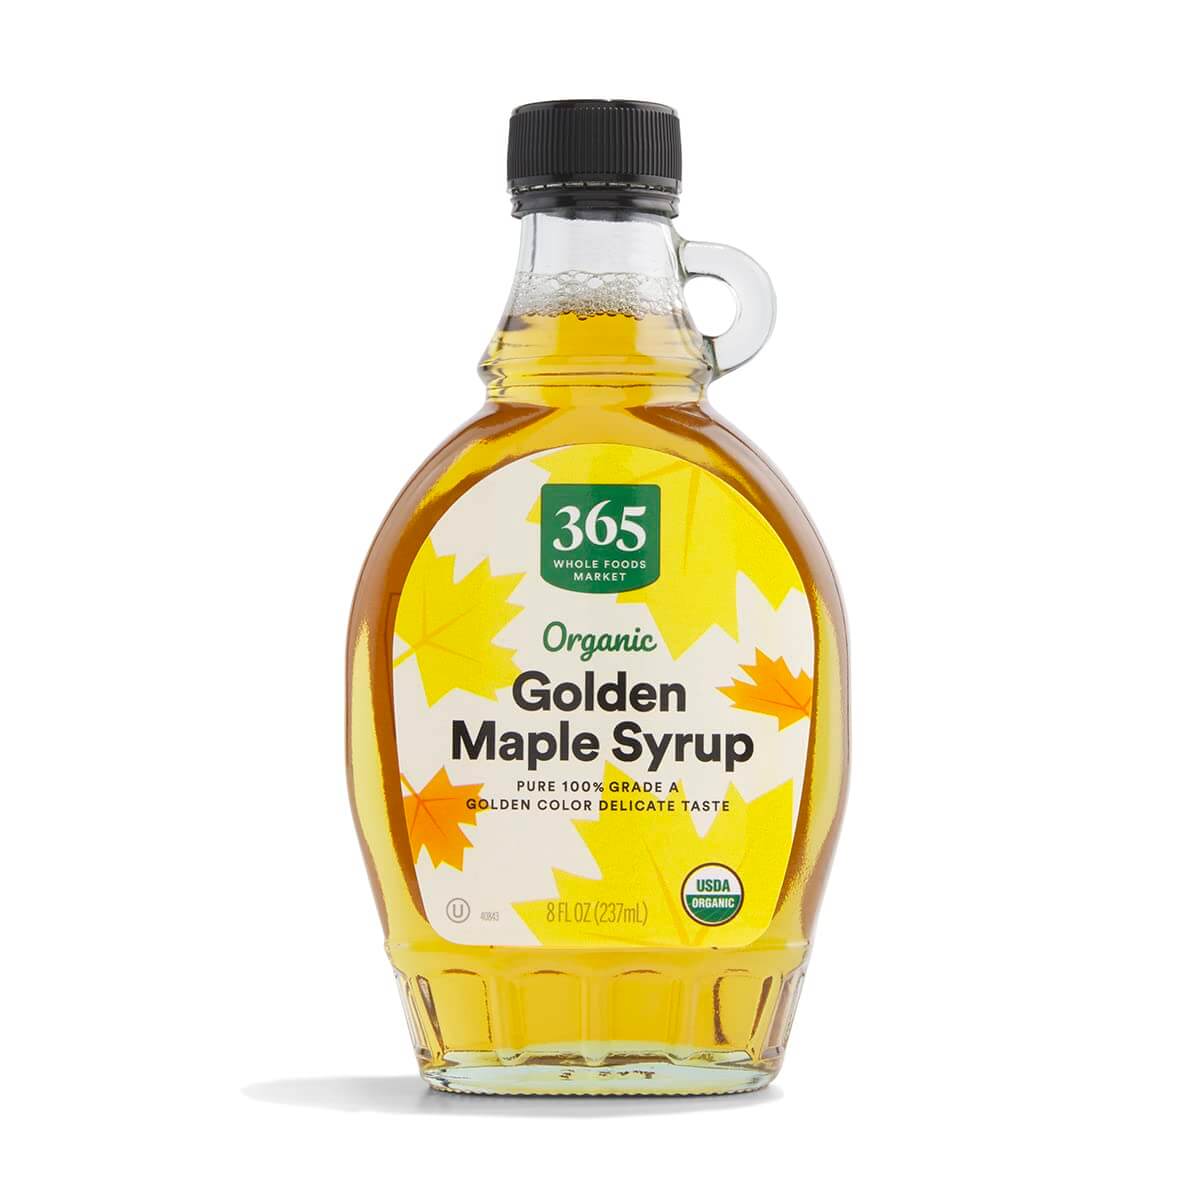 The Best Maple Syrups, According to Our Taste Tests